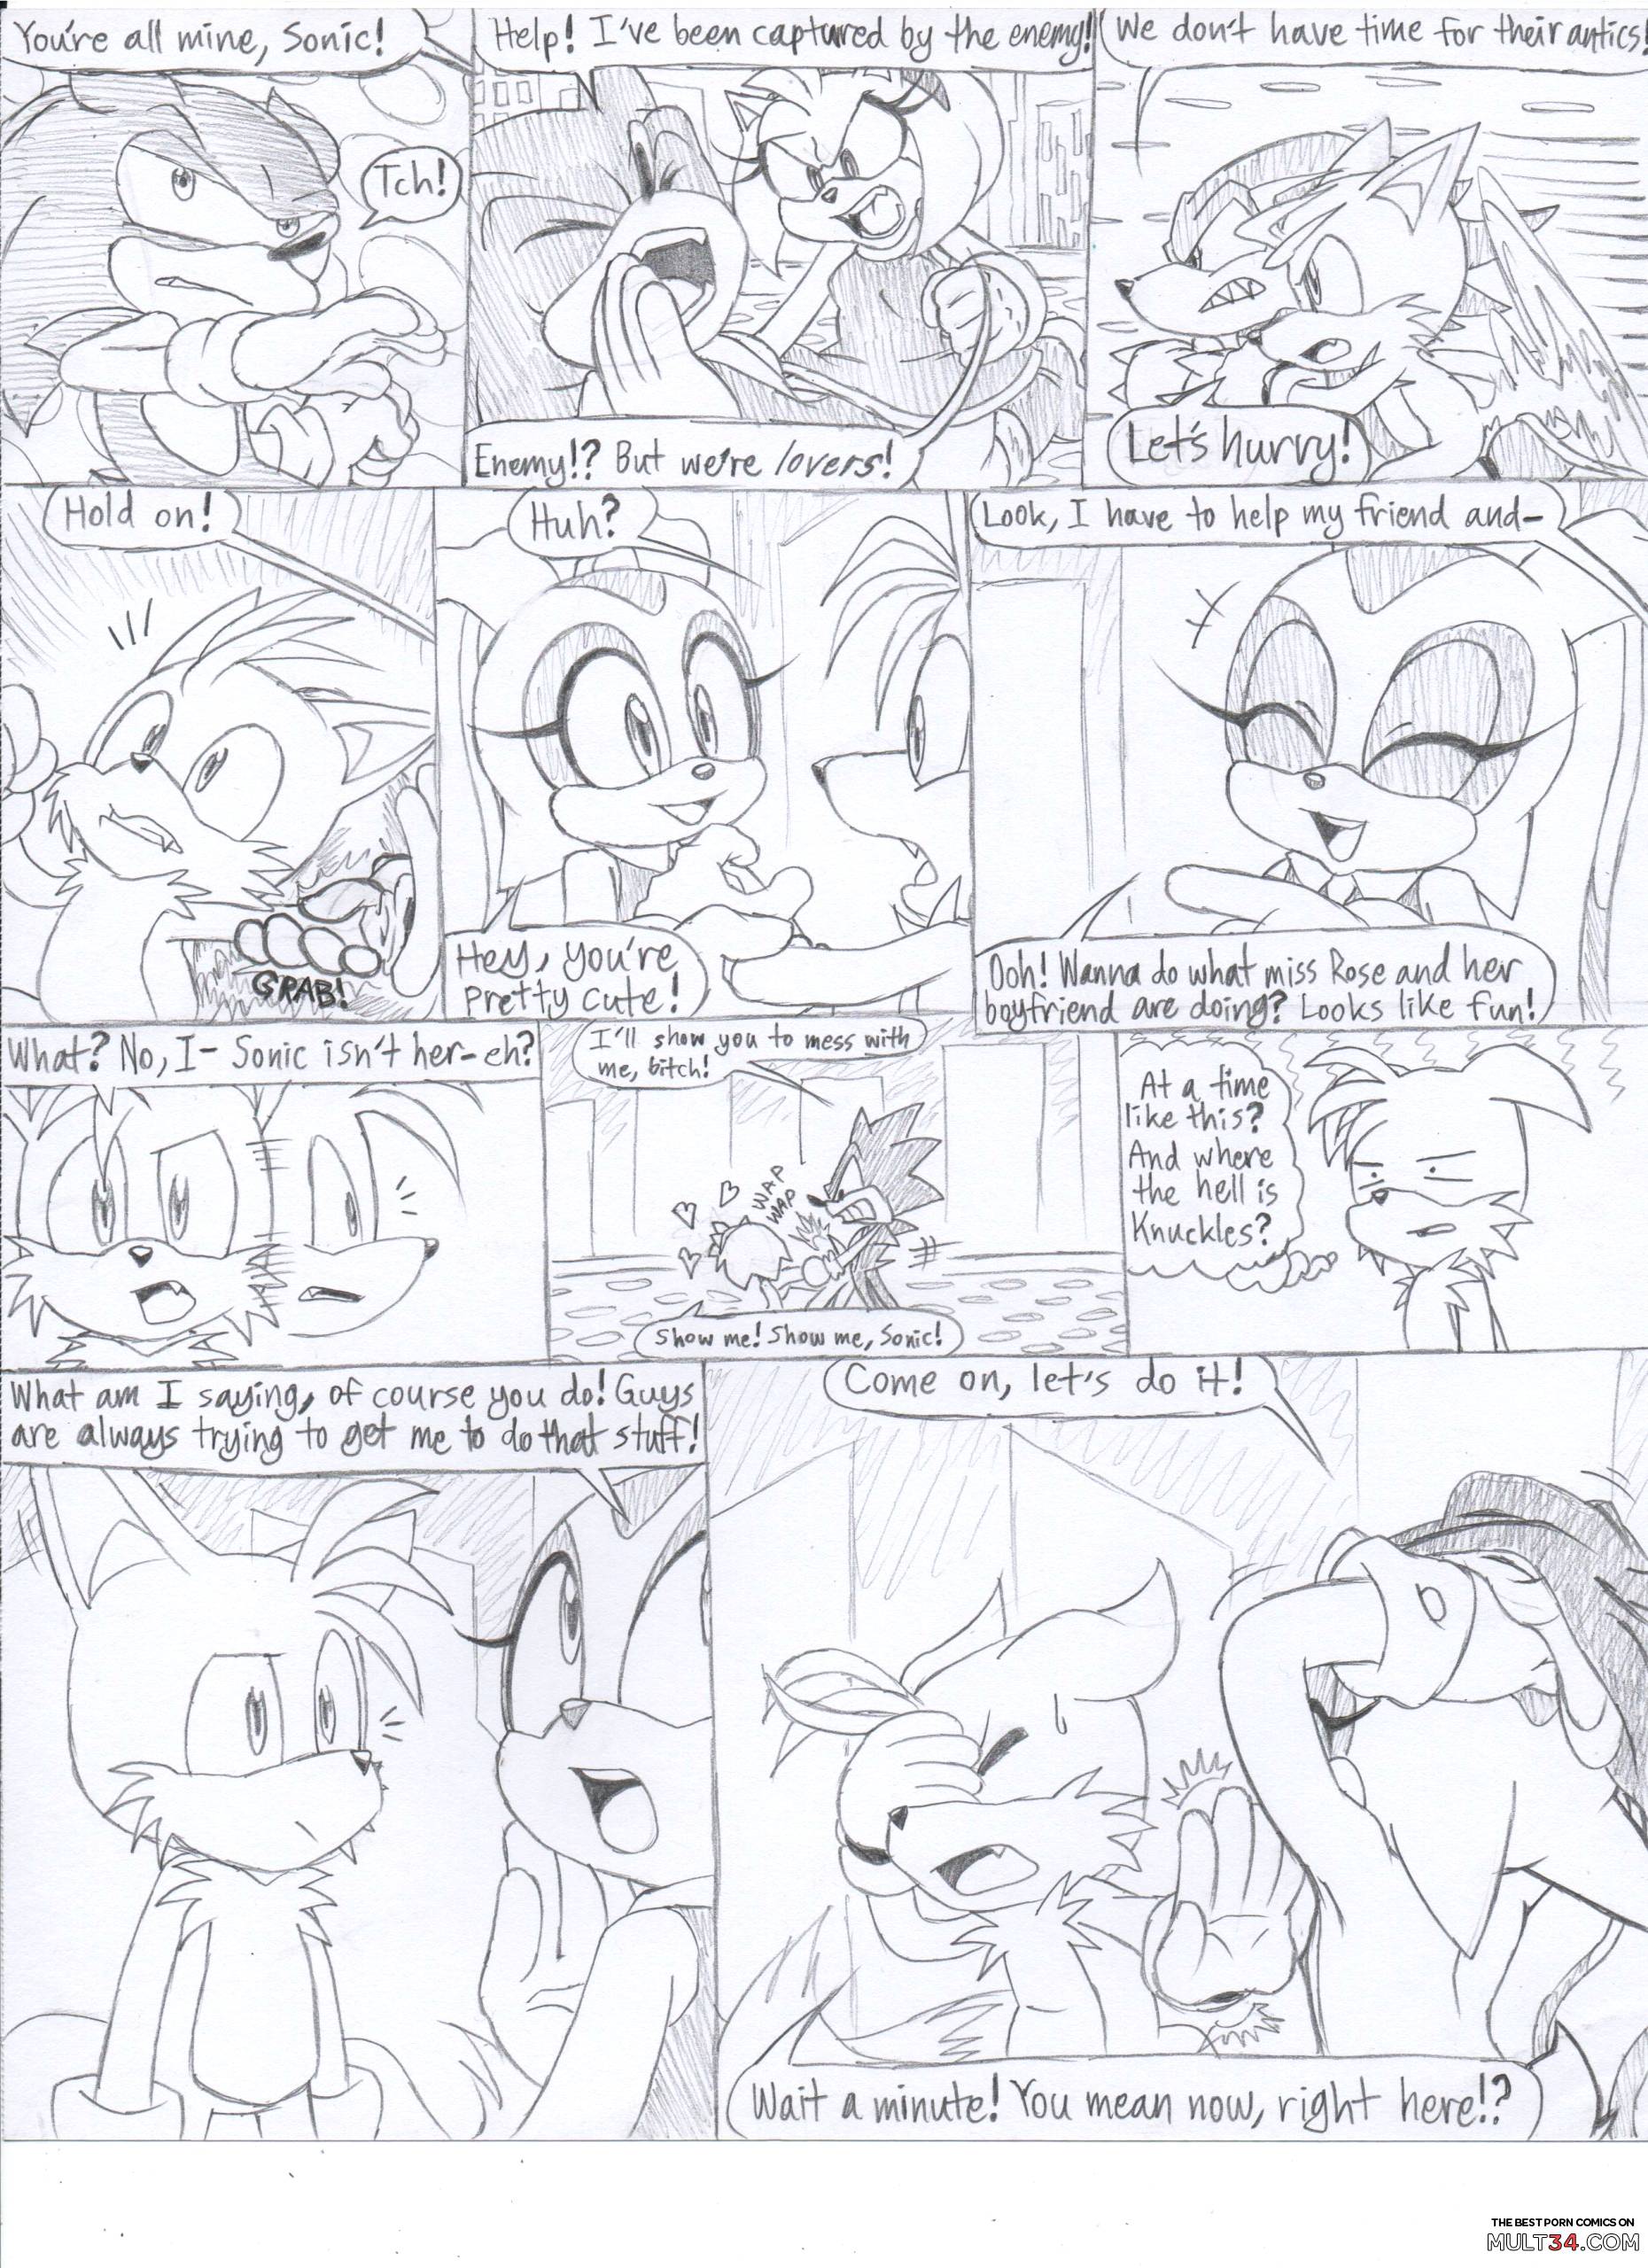 Cream x Tails page 1